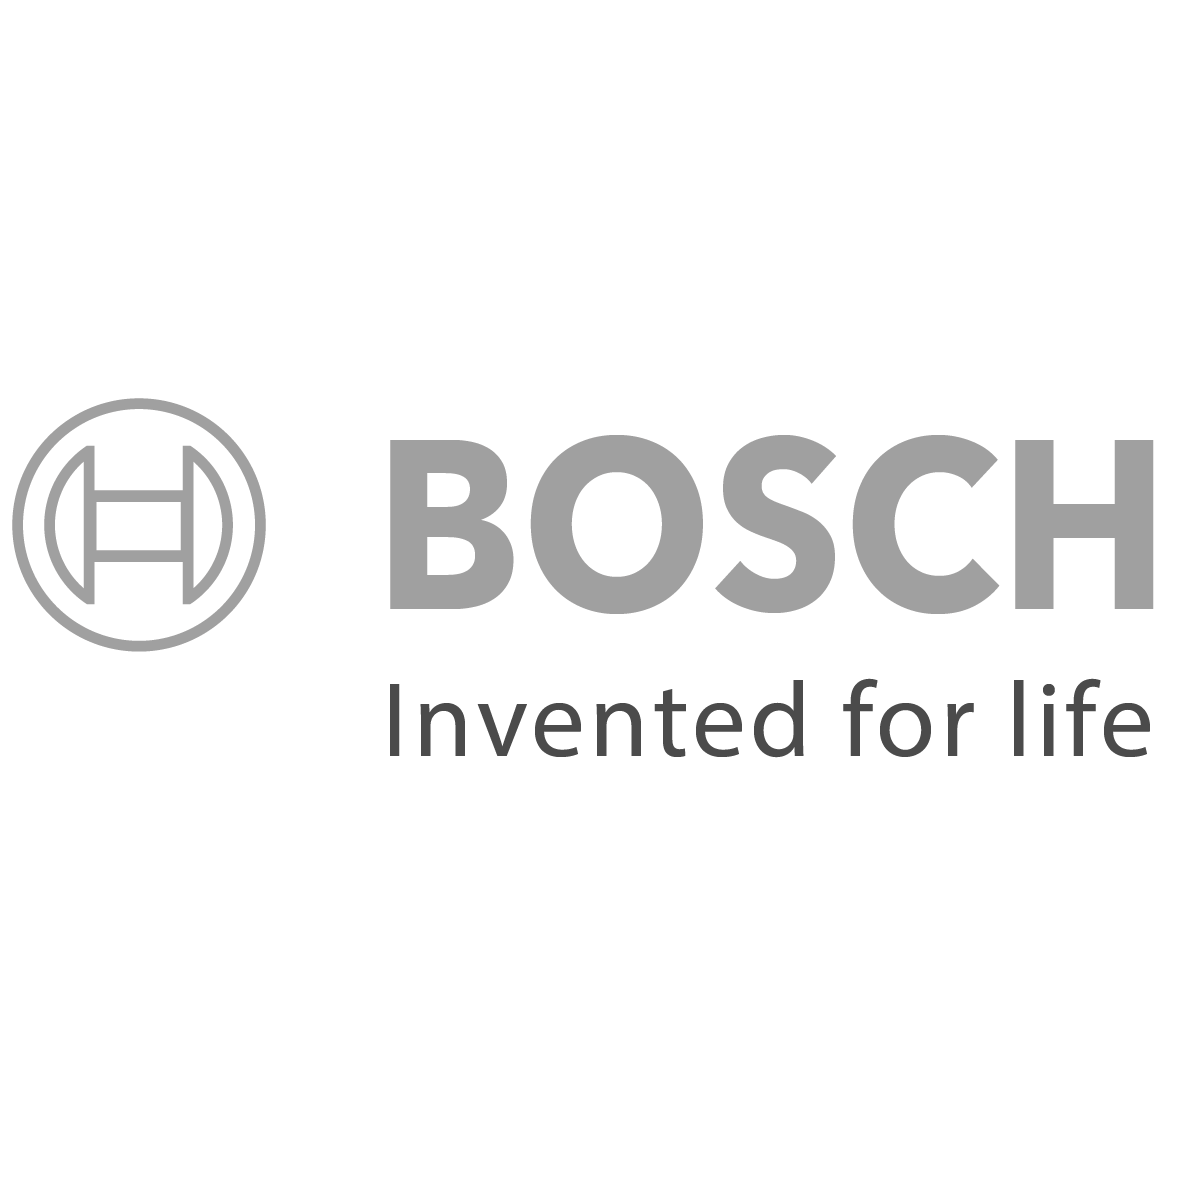 Bosch logo full colour and in black and white.